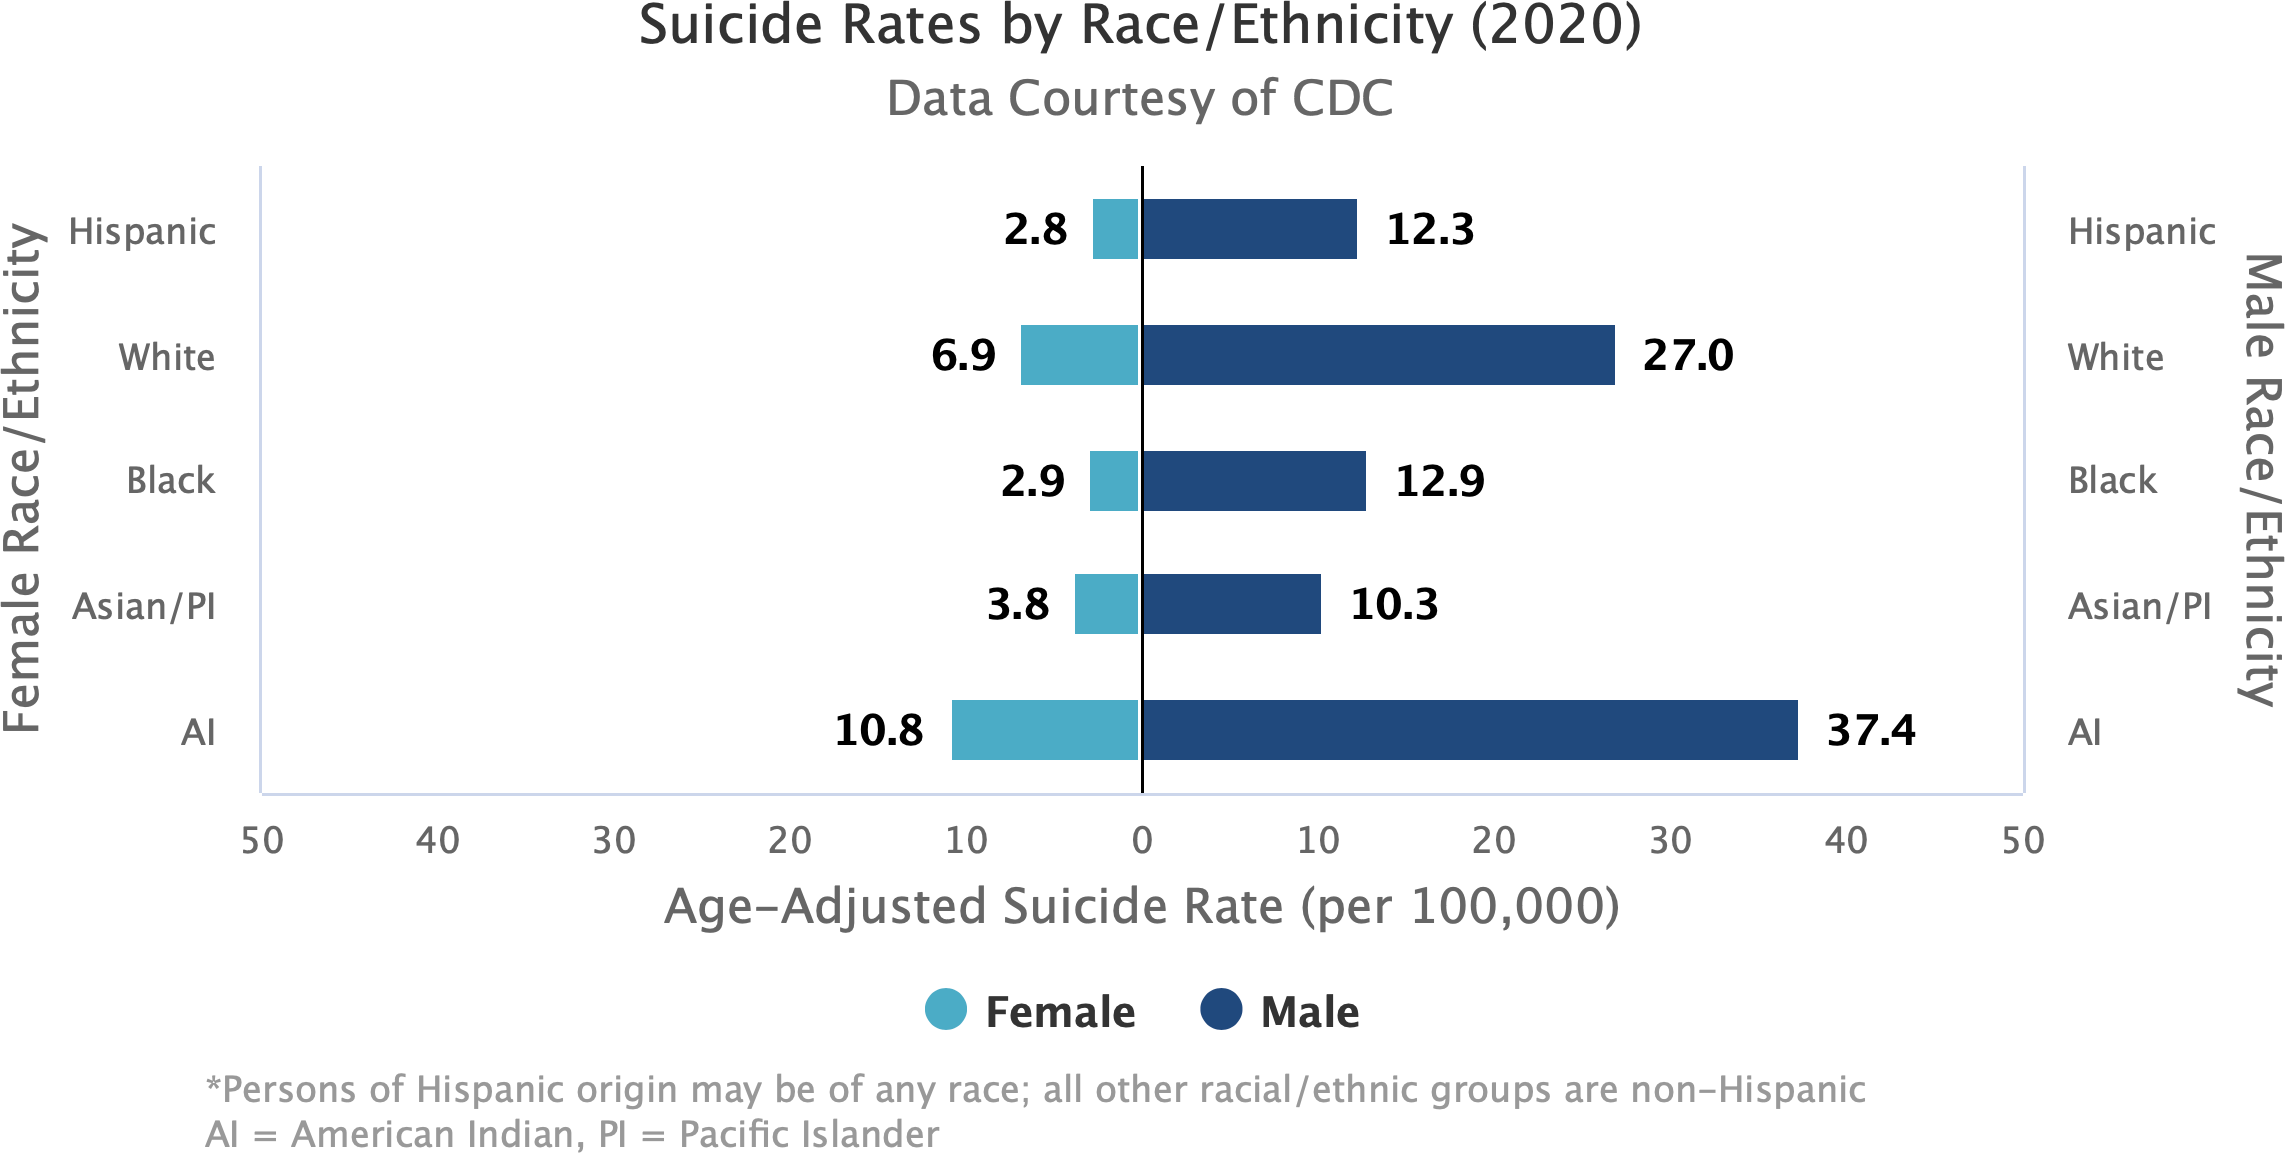 Graphic: Suicide Rates by Race and Ethnicity (2020)